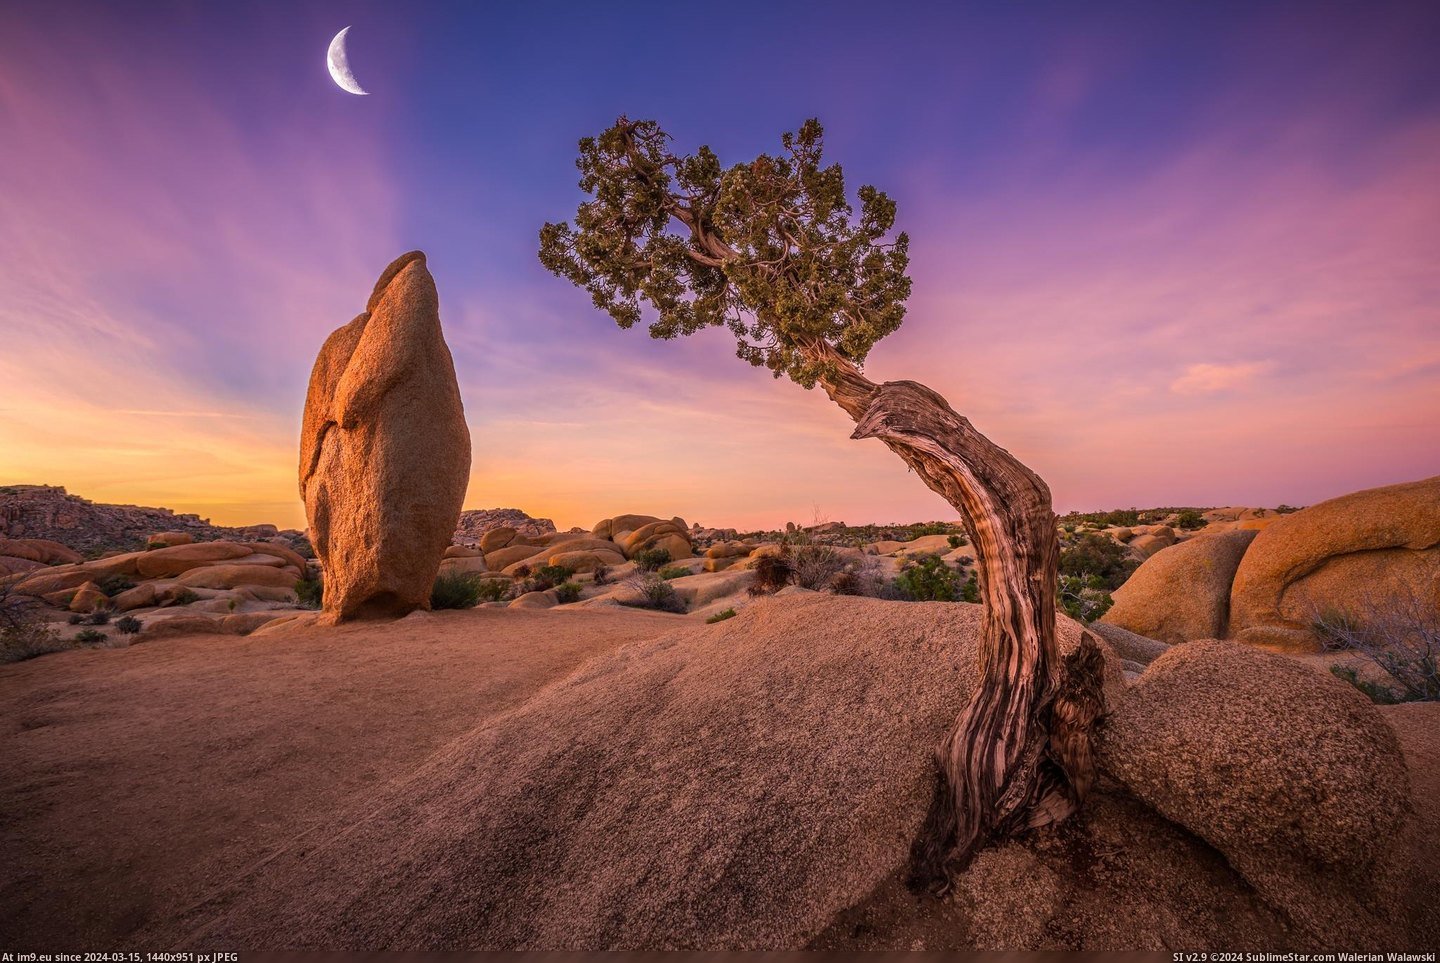 #Park #National #Tree #Rising #Paying #Moon #2048x1365 #Joshua [Earthporn]  Paying Reverence To The Rising Moon, Joshua Tree National Park [2048x1365] Pic. (Image of album My r/EARTHPORN favs))